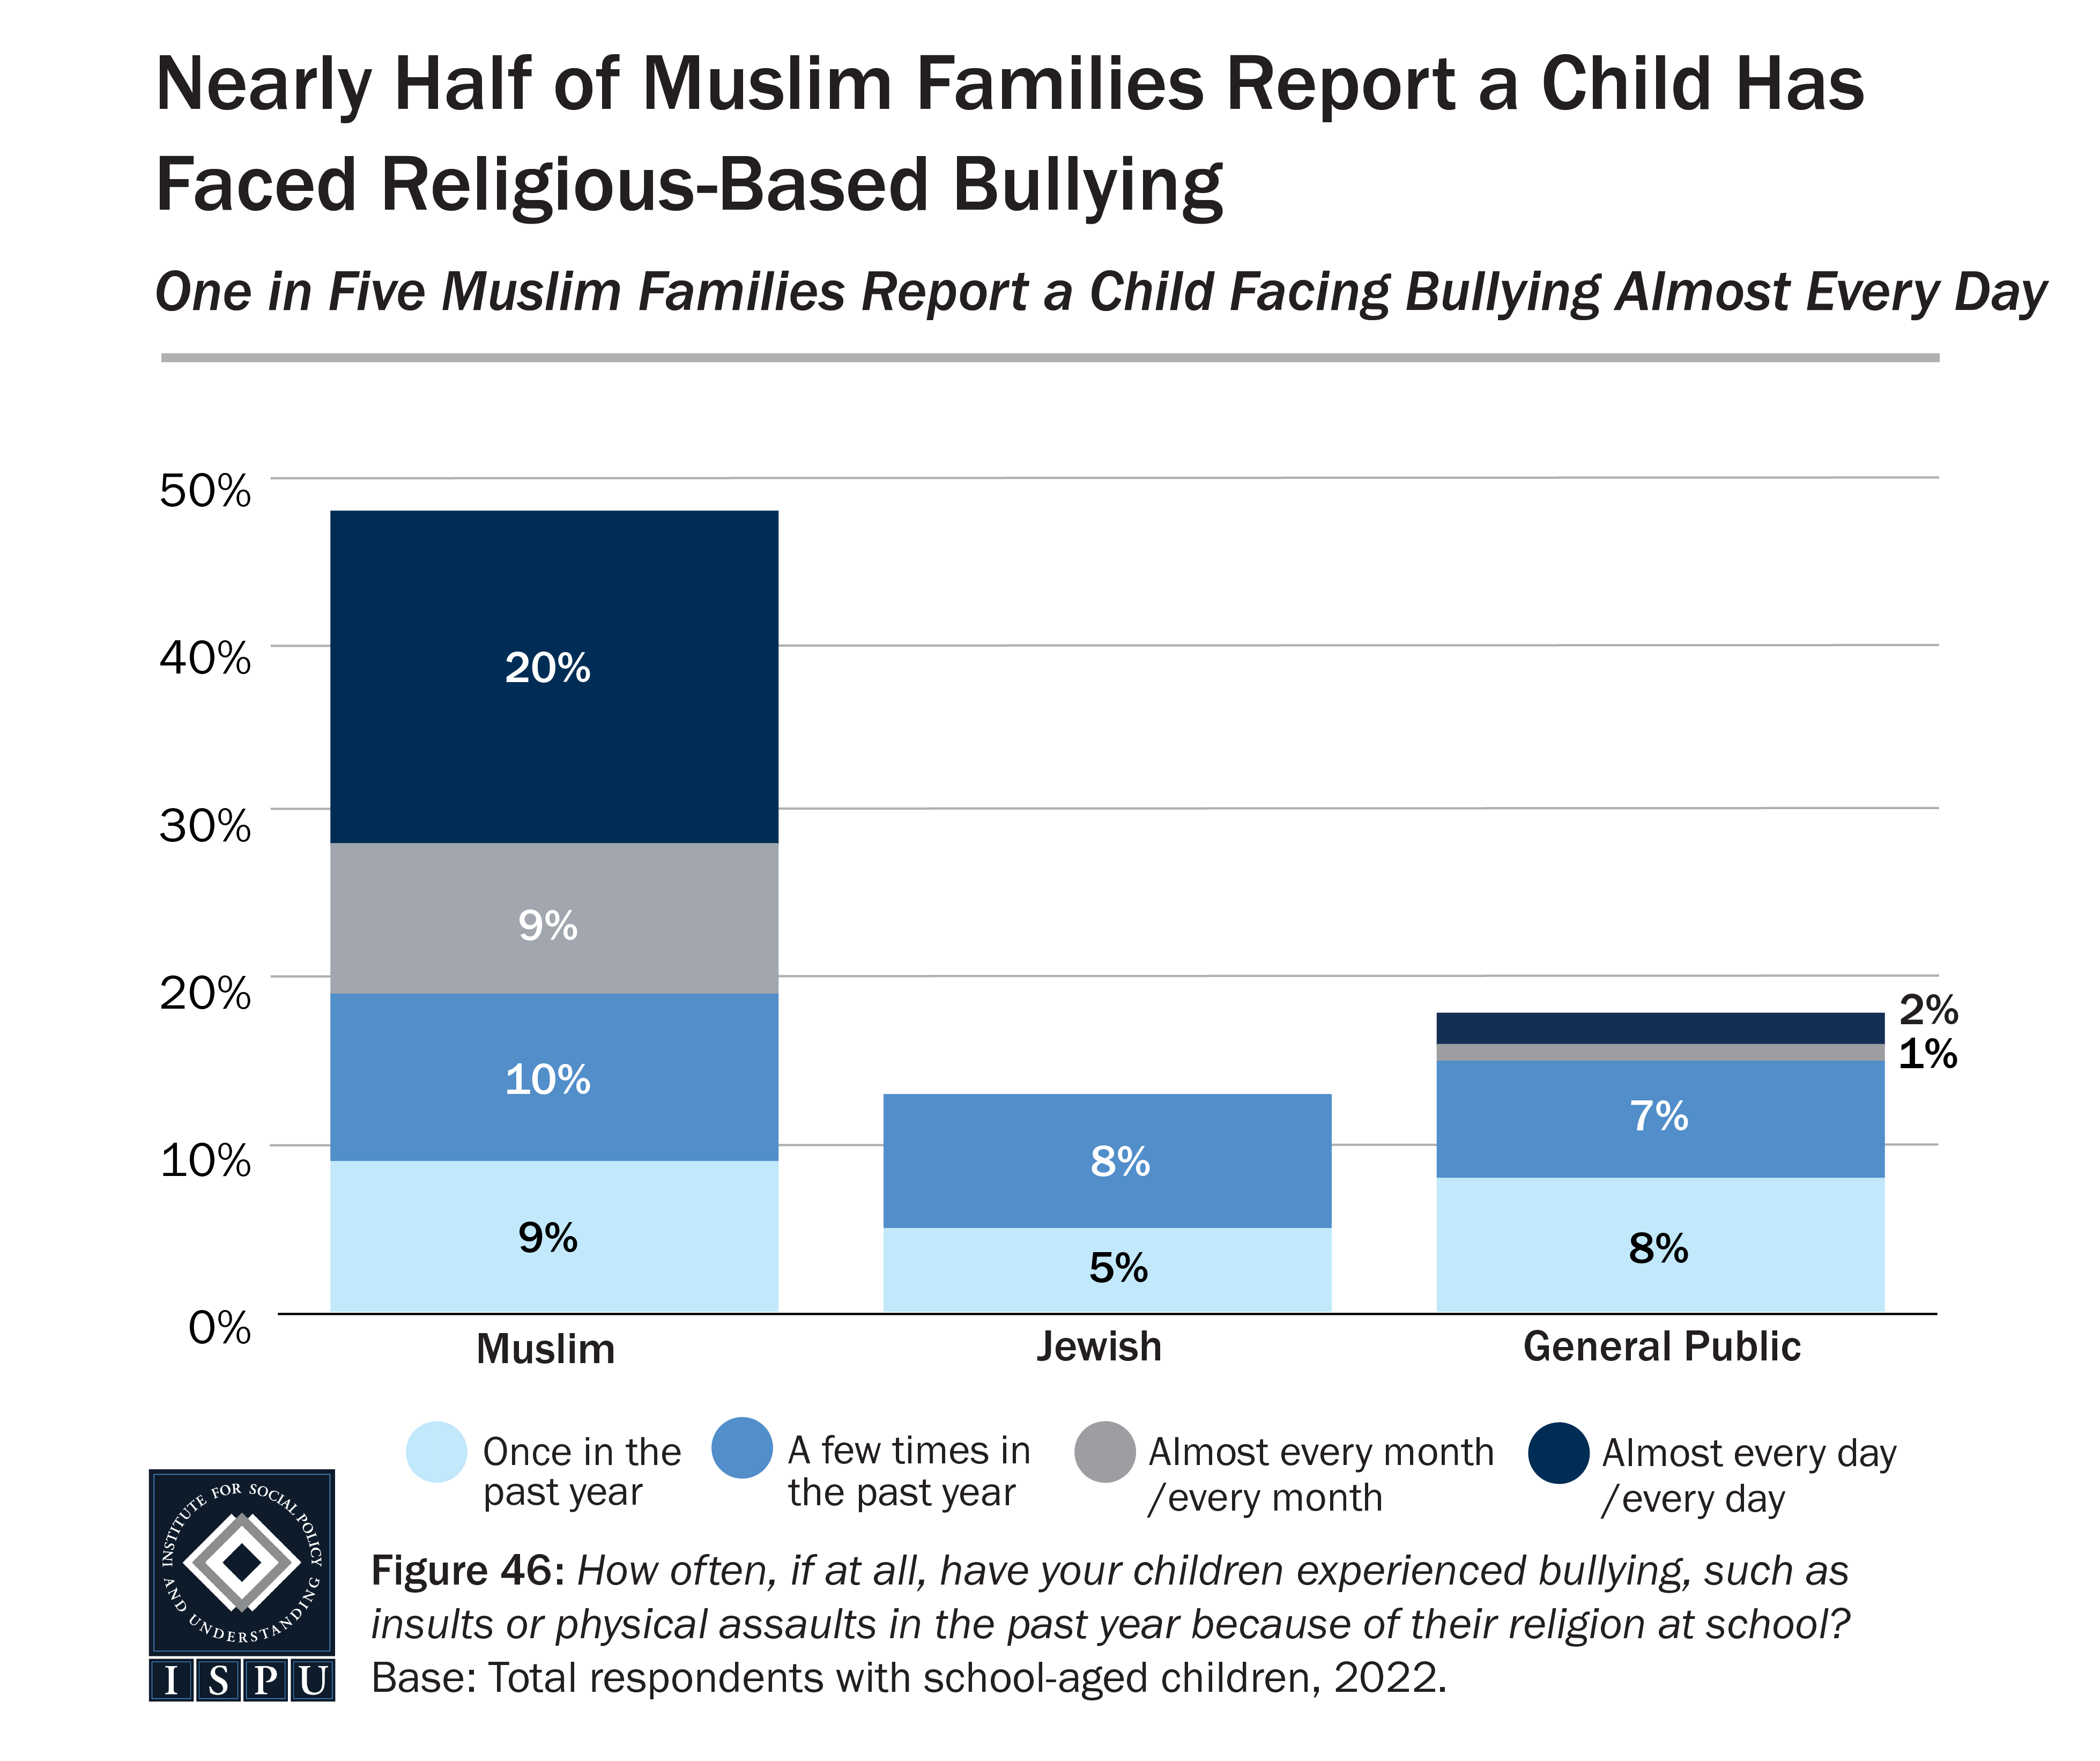 A stacked bar graph showing the proportion and frequency of Muslim families with a child who faced religious-based bullyin in the past year.